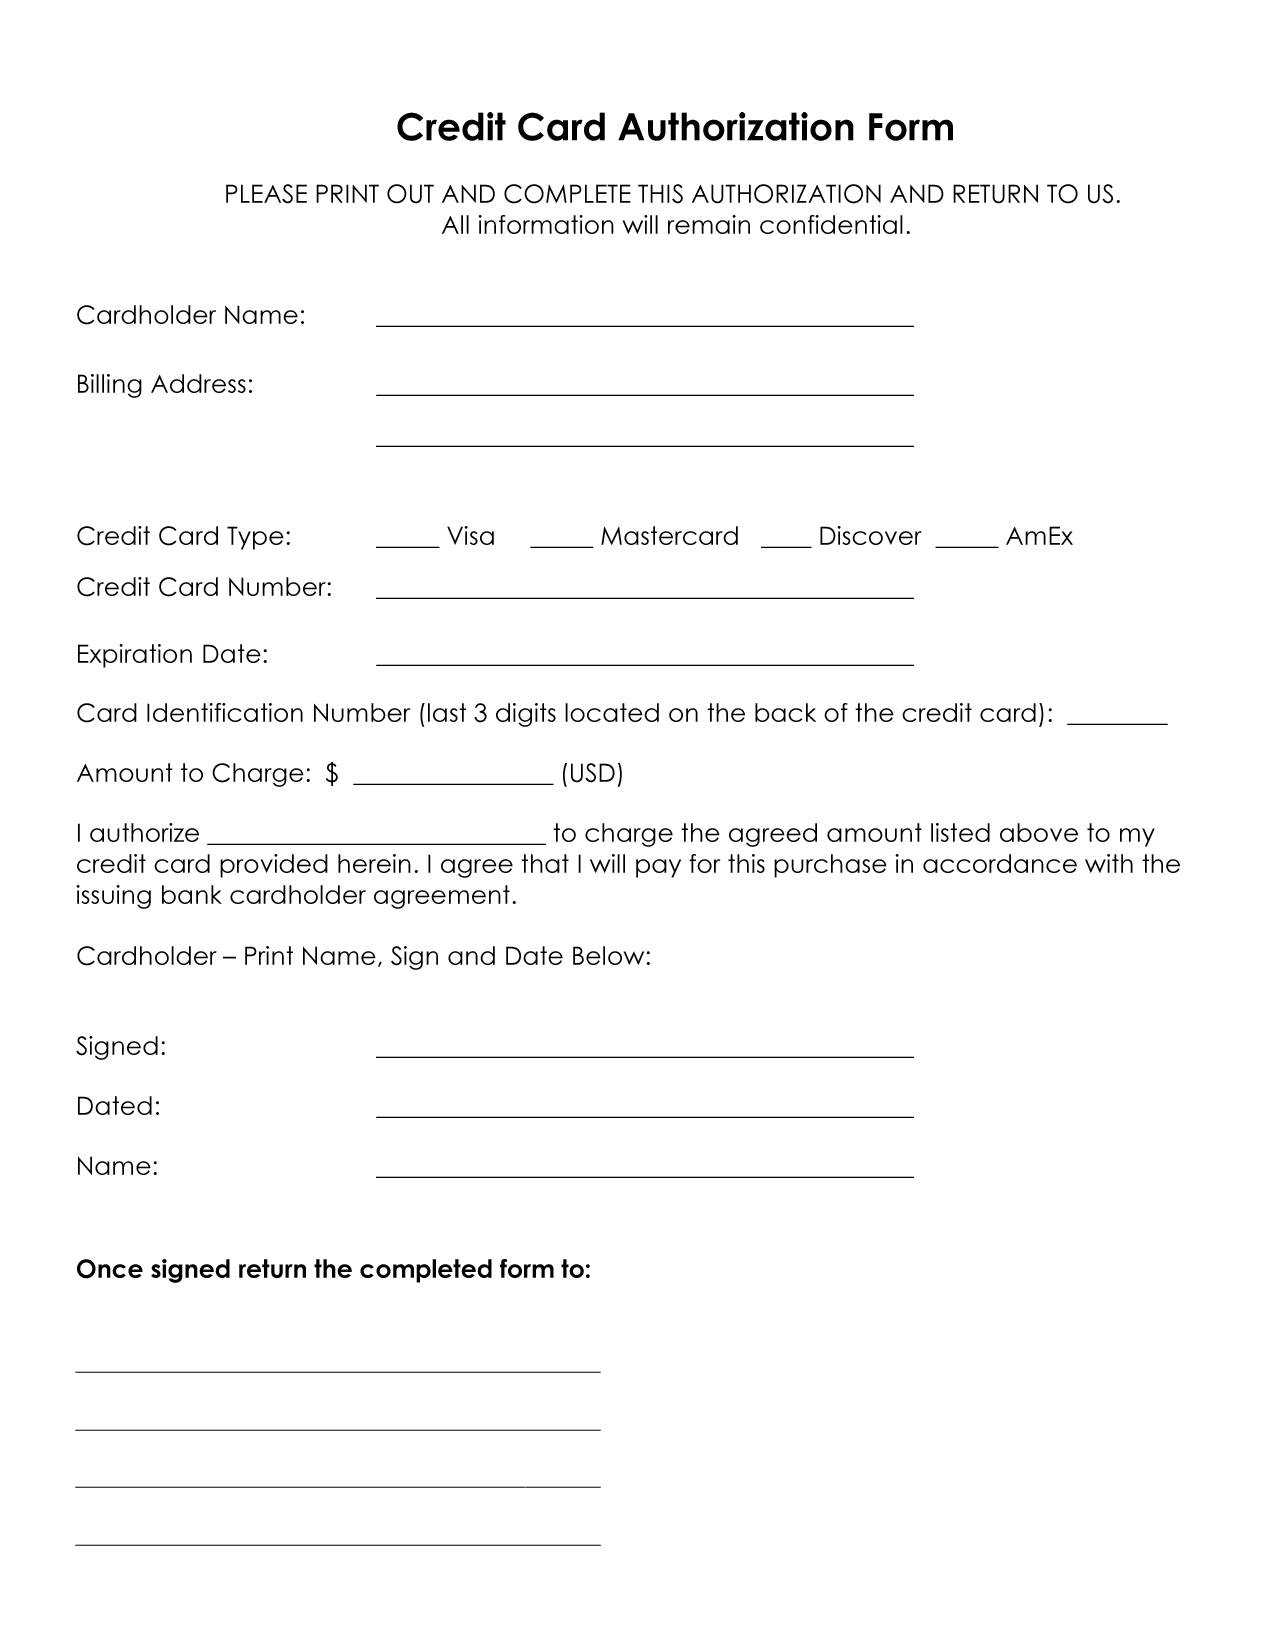 Credit Card Payment Form Word - Milas.westernscandinavia Within Credit Card Billing Authorization Form Template